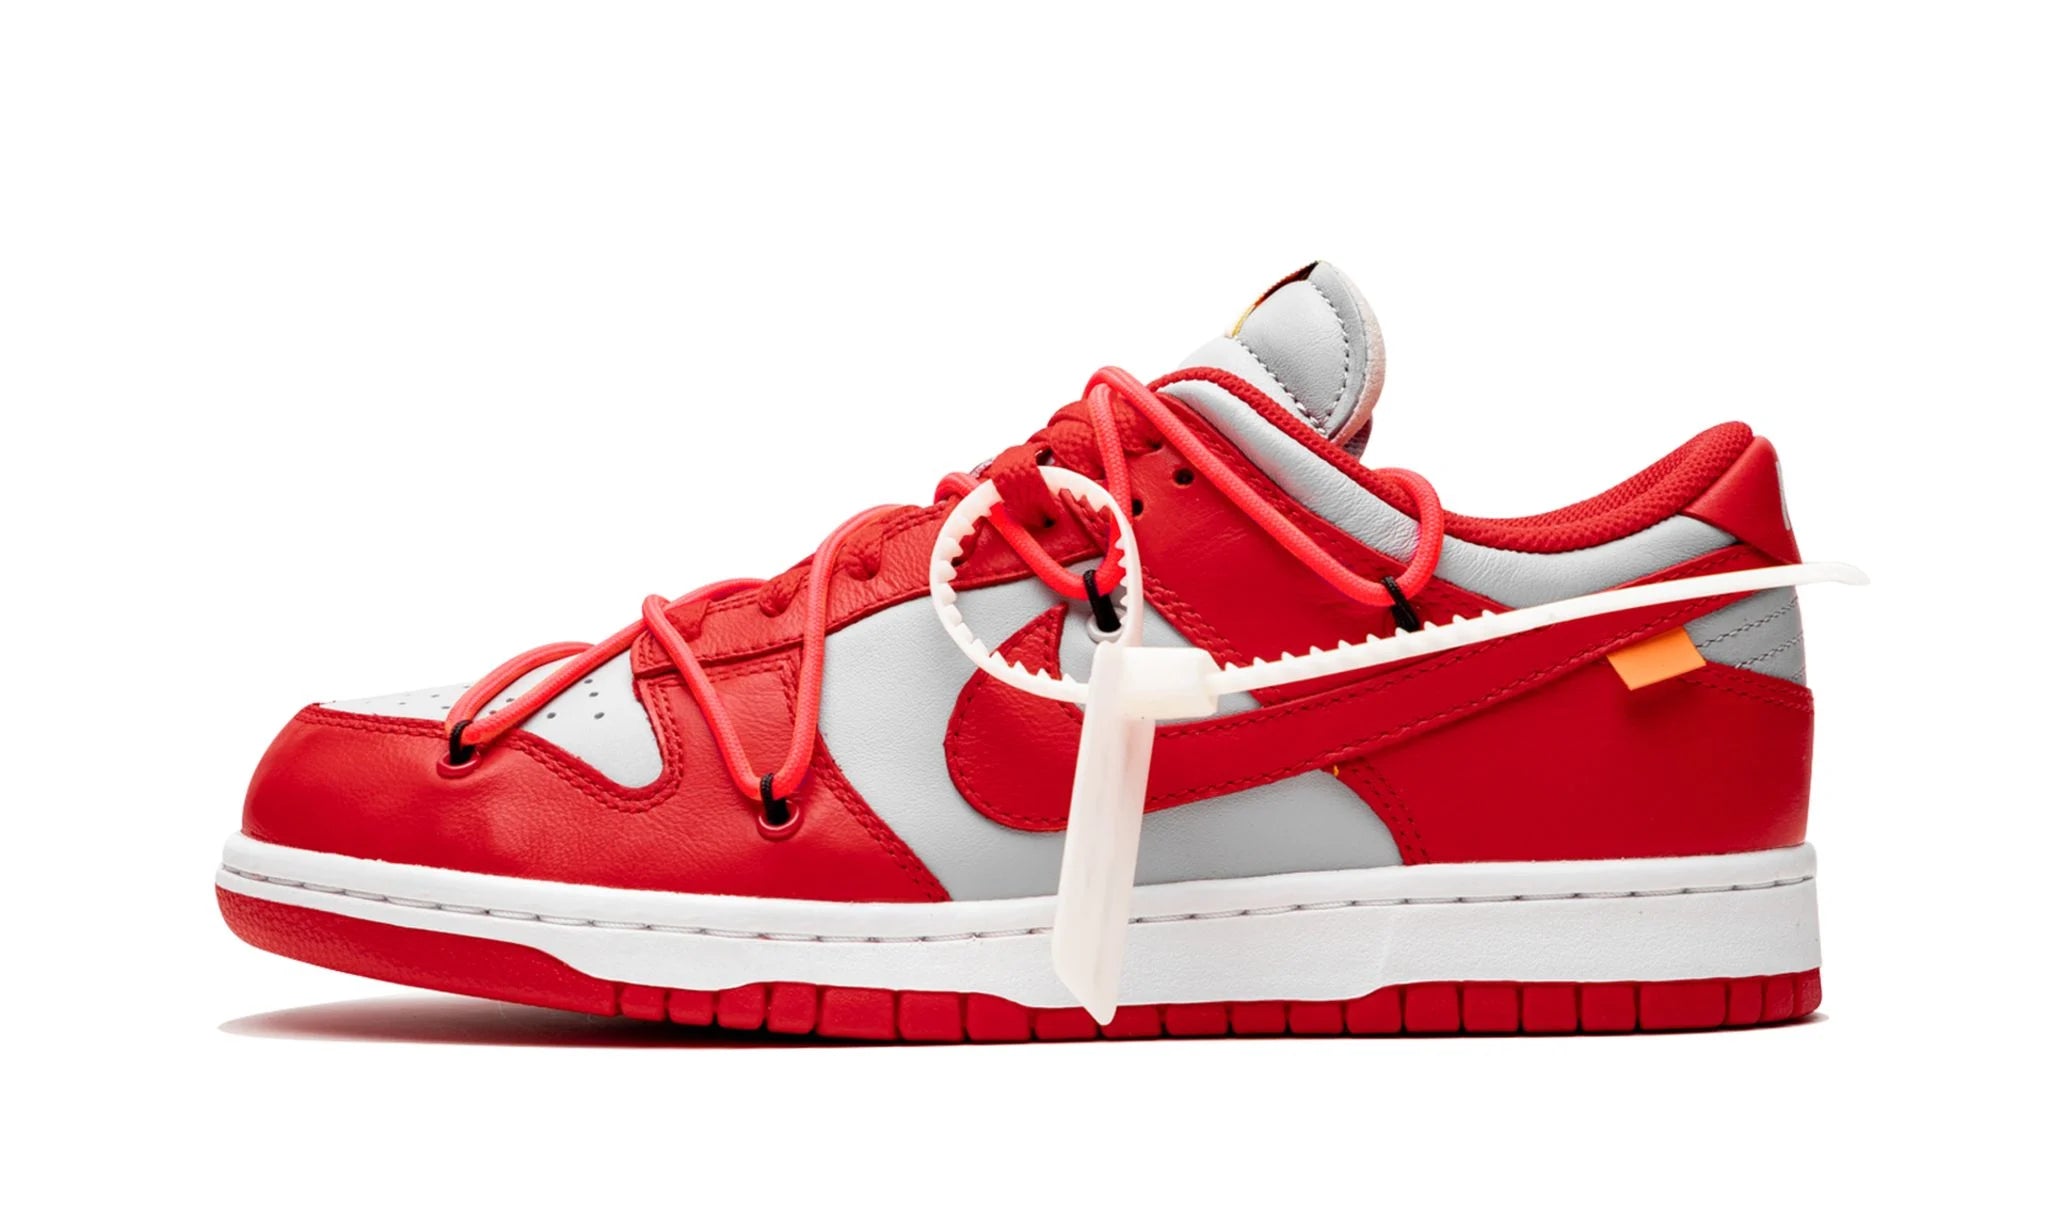 DUNK LOW "Off-White - University Red"